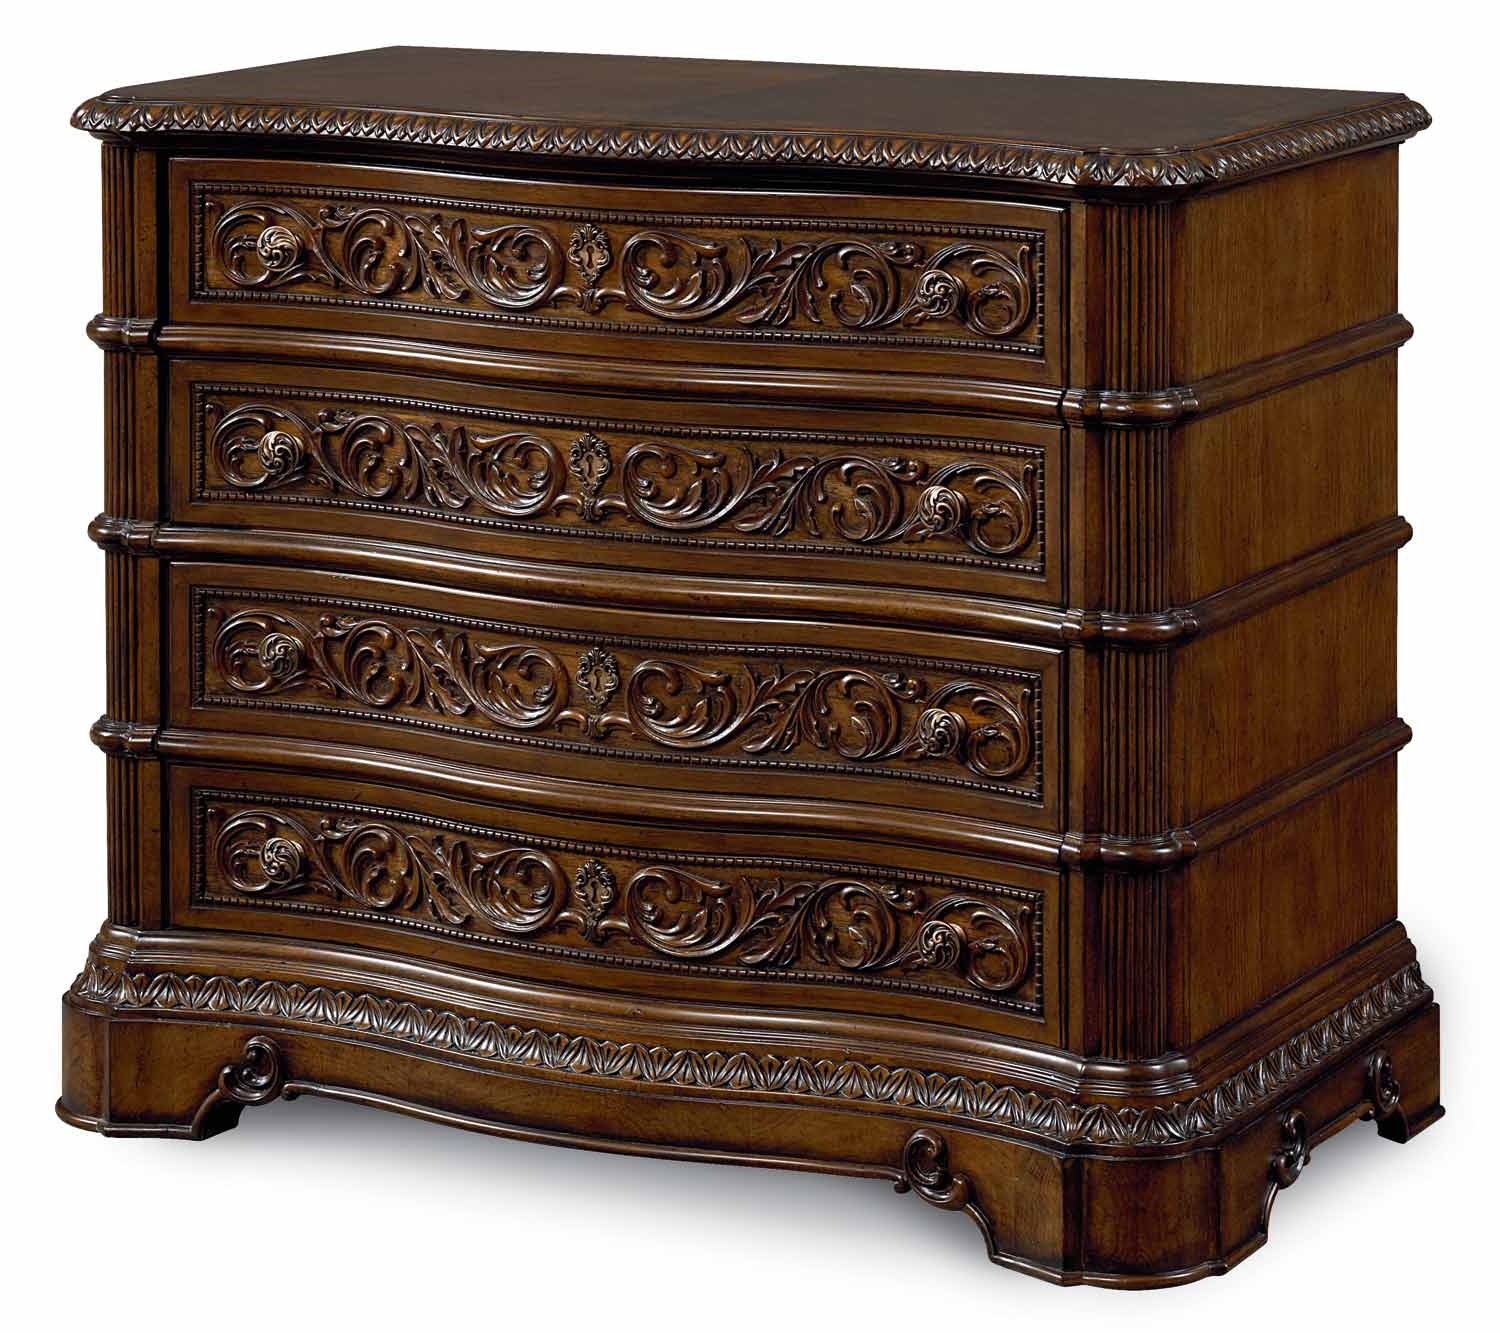 Legacy Classic Pemberleigh File Chest - Brandy/Burnished Edges